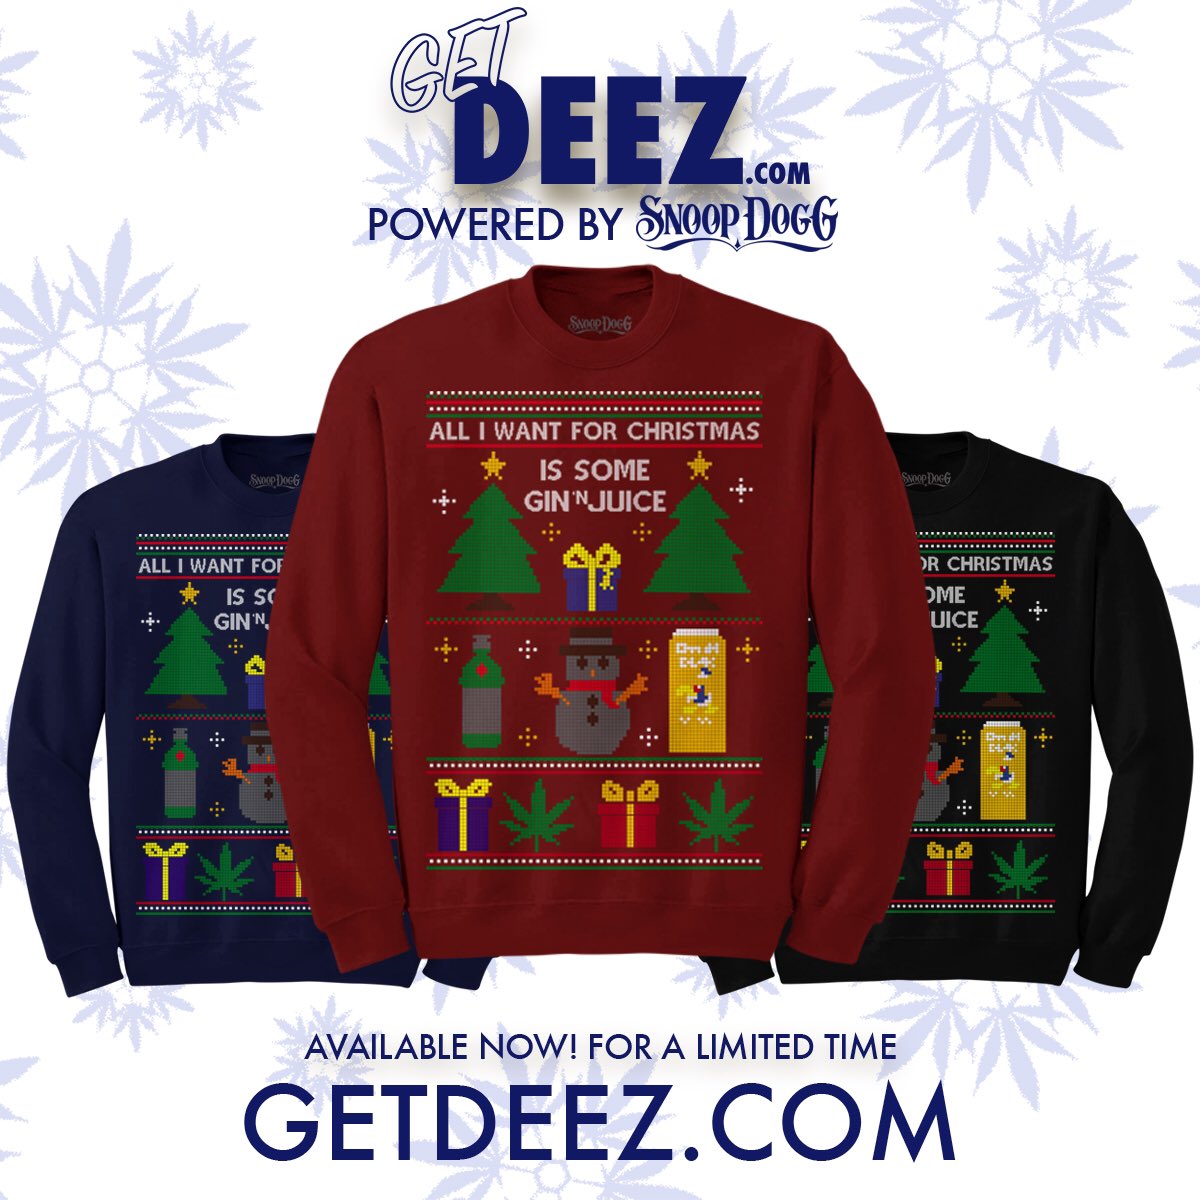 blessn yall for the holidays https://t.co/OlX2deX6xz #getdeez https://t.co/suxdB47hk1